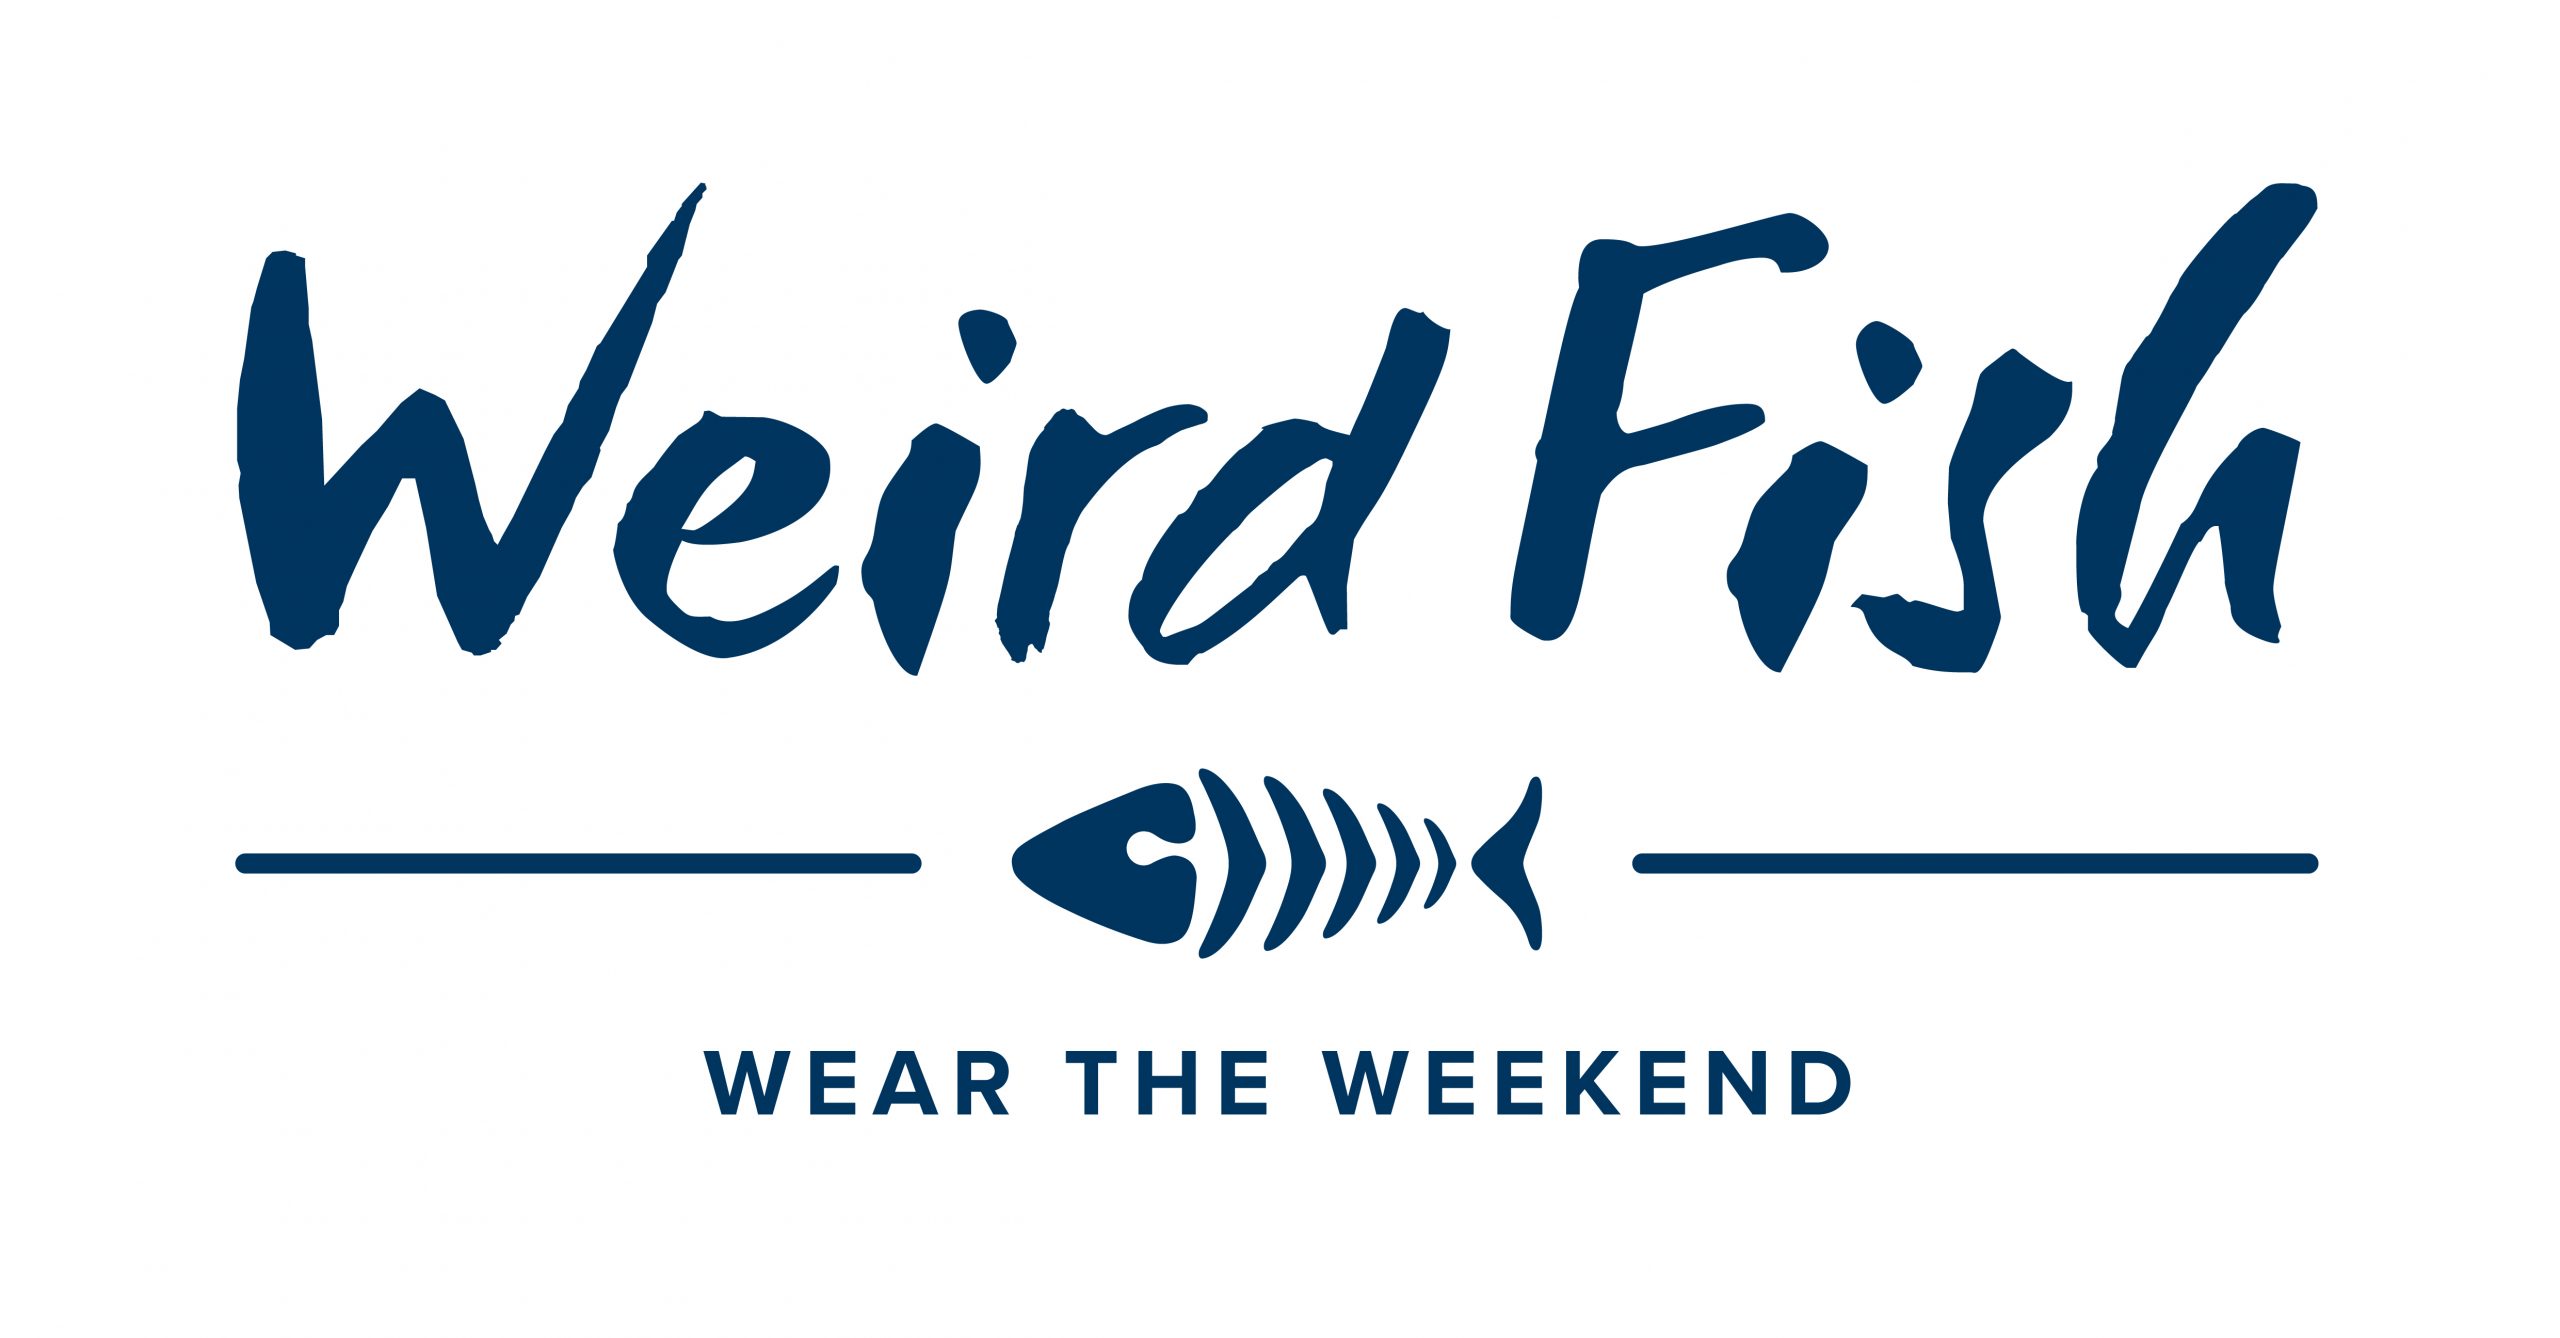 30% off + extra 10% off at Weird Fish